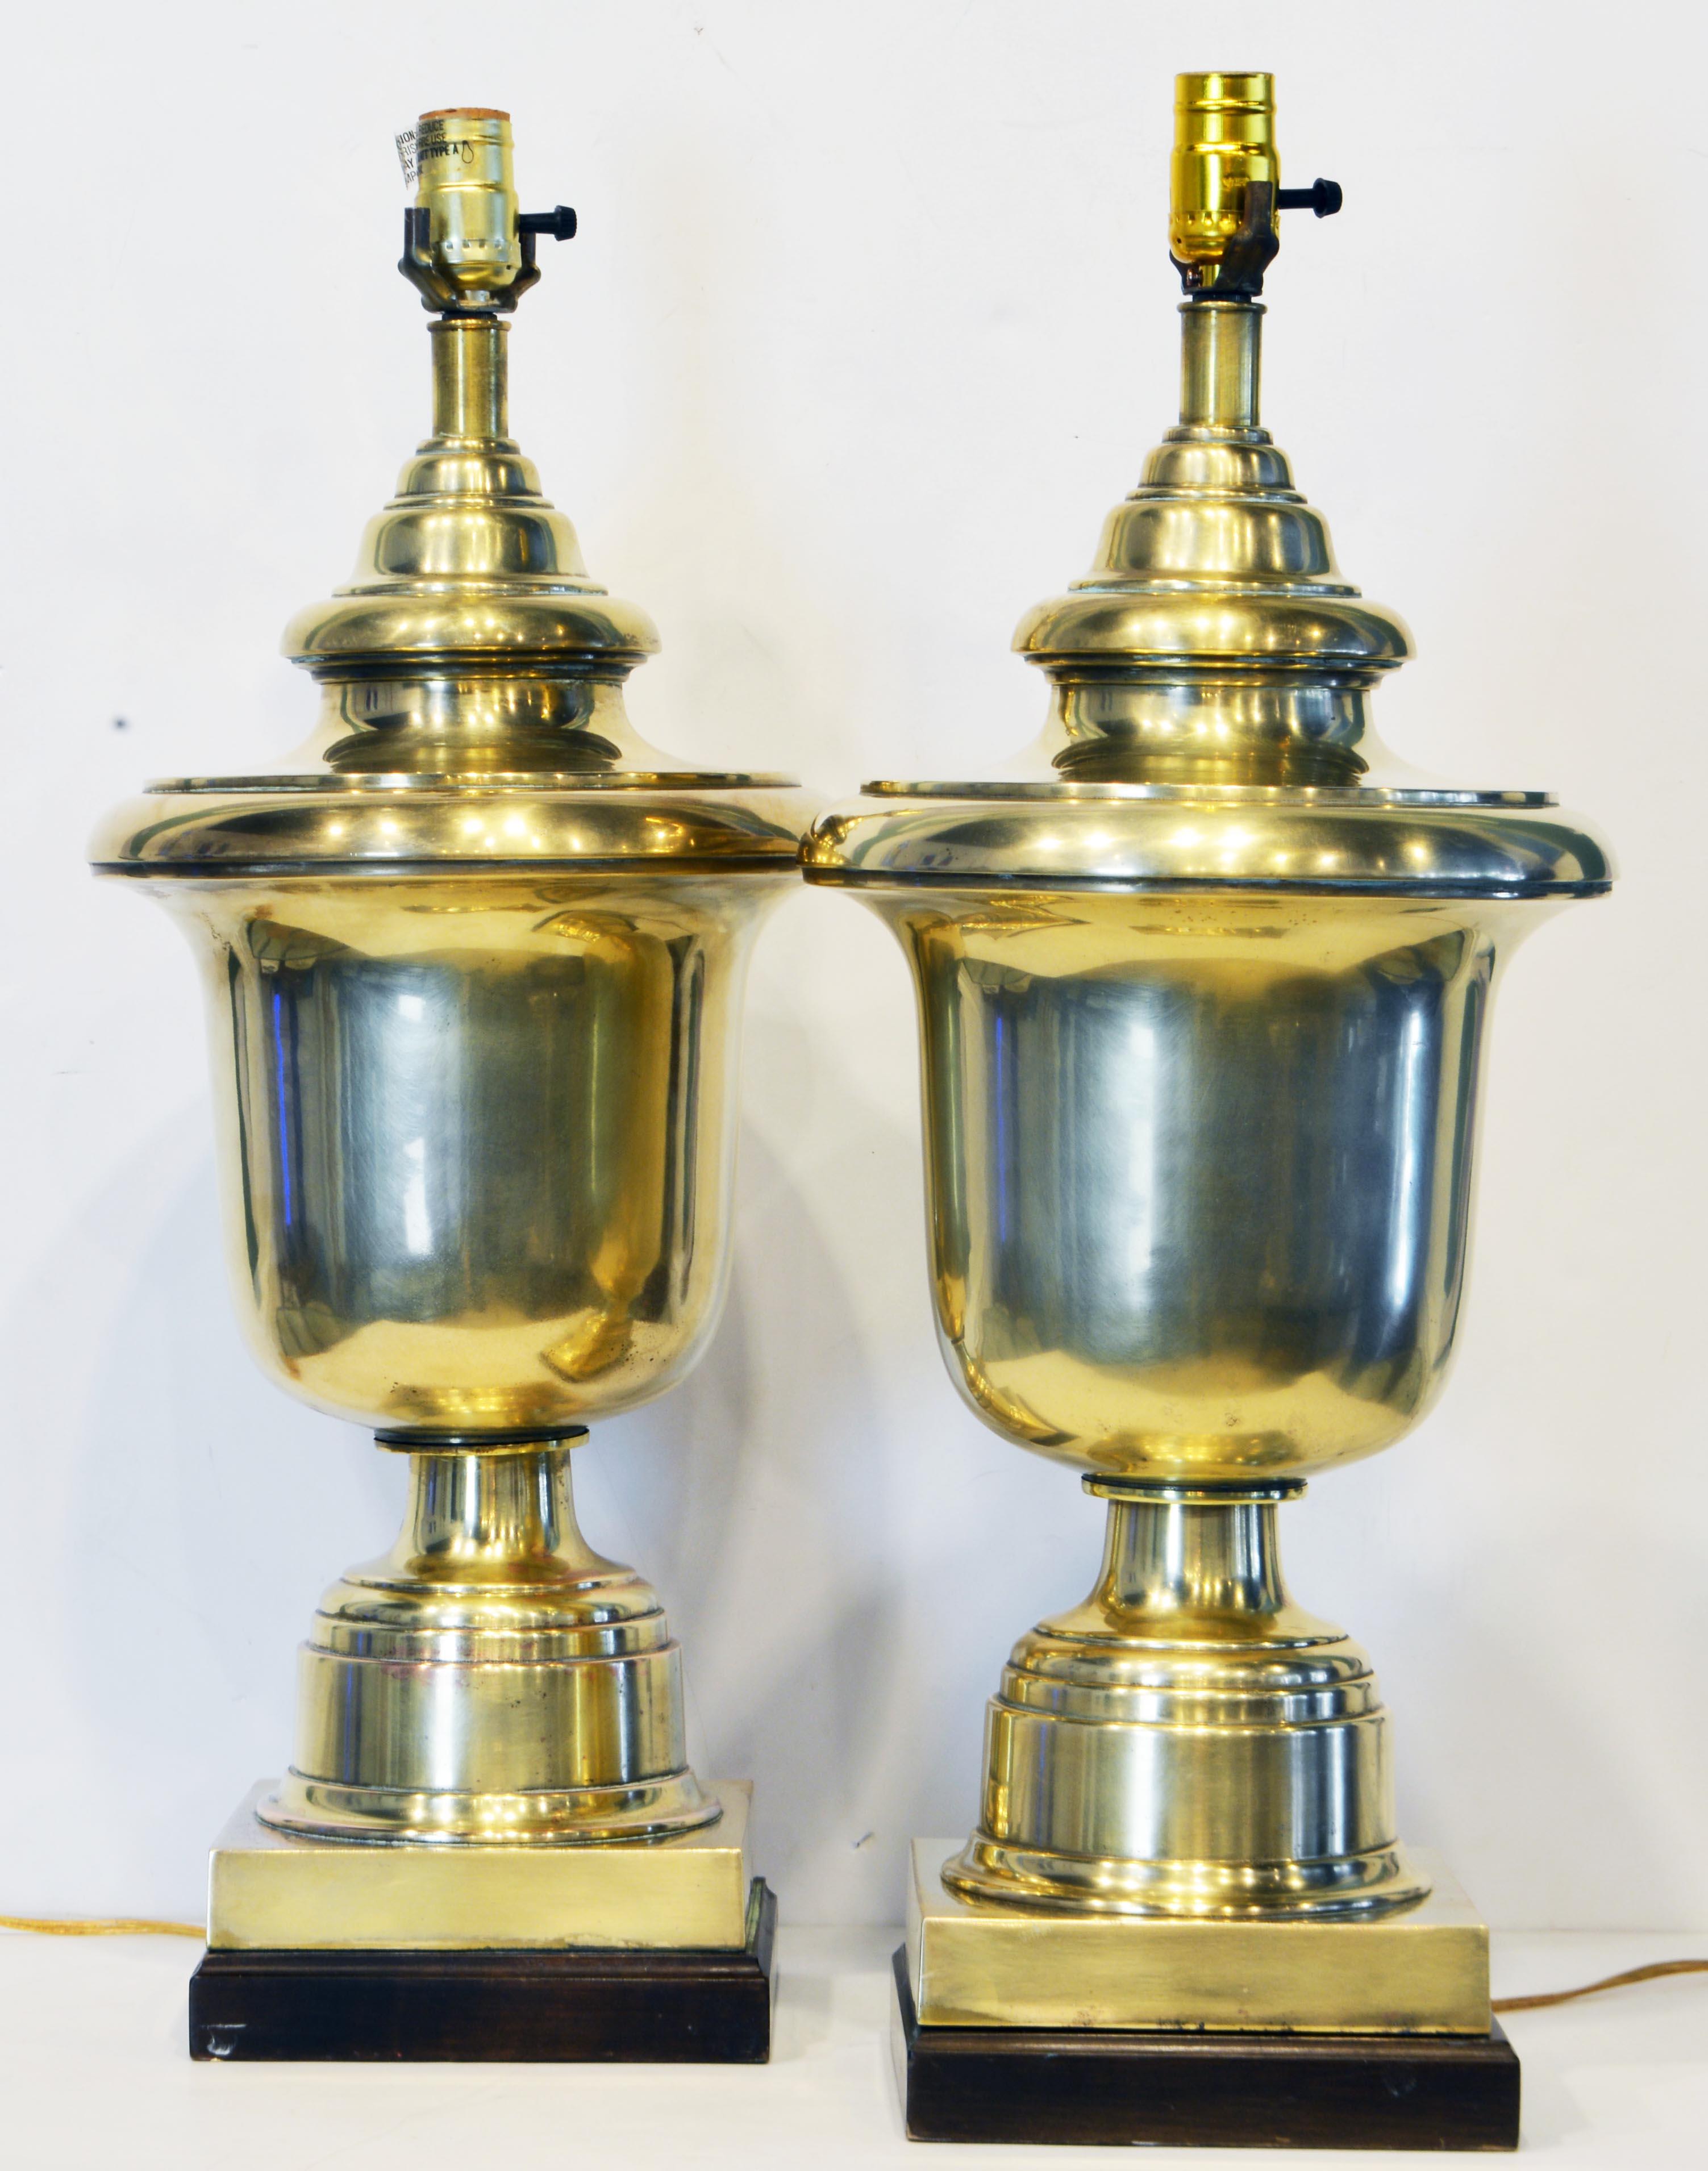 This pair of stately urn shaped solid brass table lamps feature large neoclassical style urns on square ebonized bases. As shown without shades they stand 26 inches tall making an impressive statement.